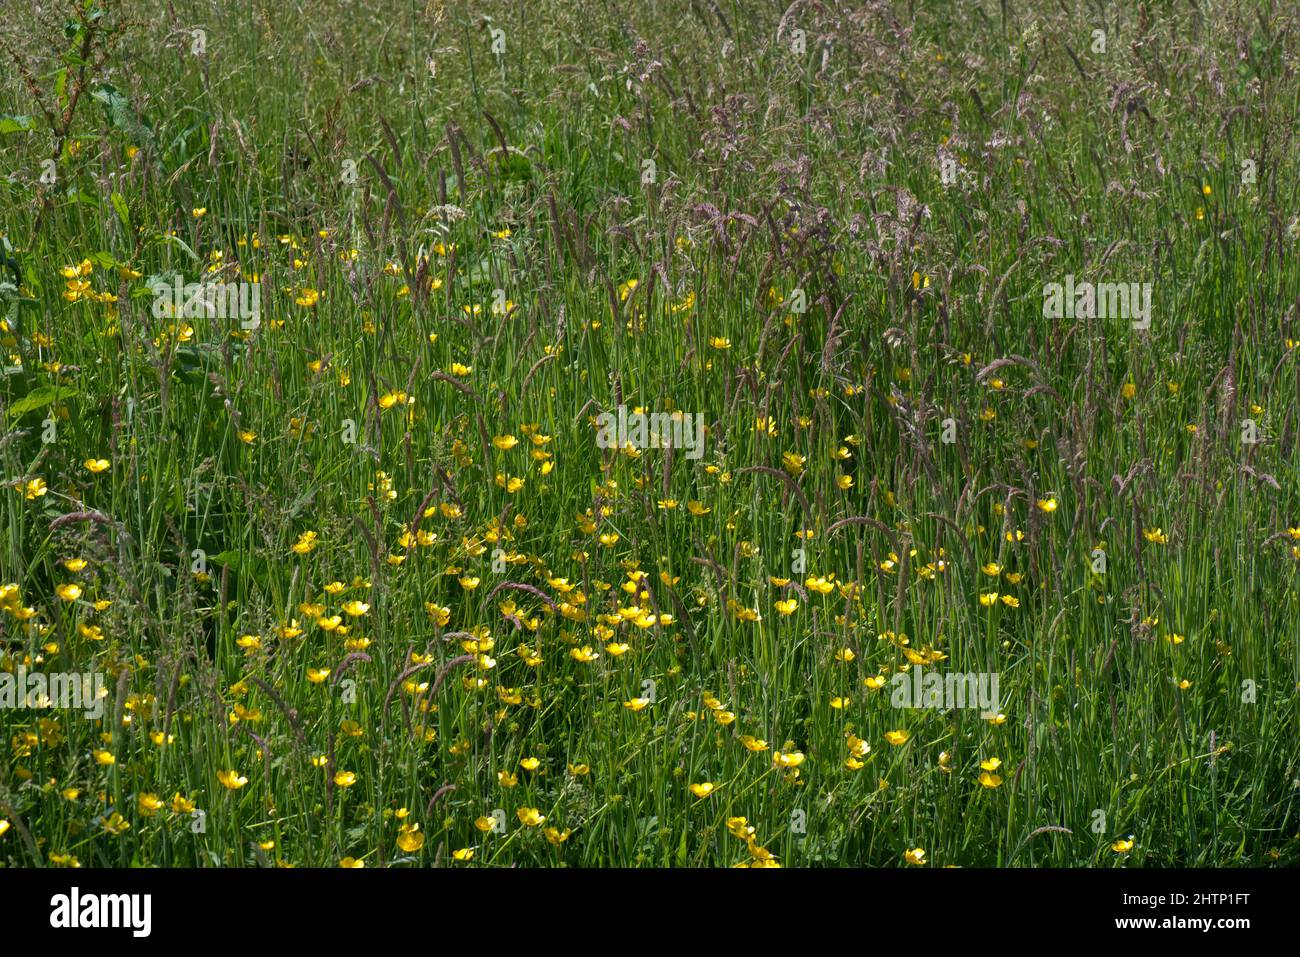 Meadow or field buttercups in flower in pasture of mixed grasses in early summer, Berkshire, May Stock Photo